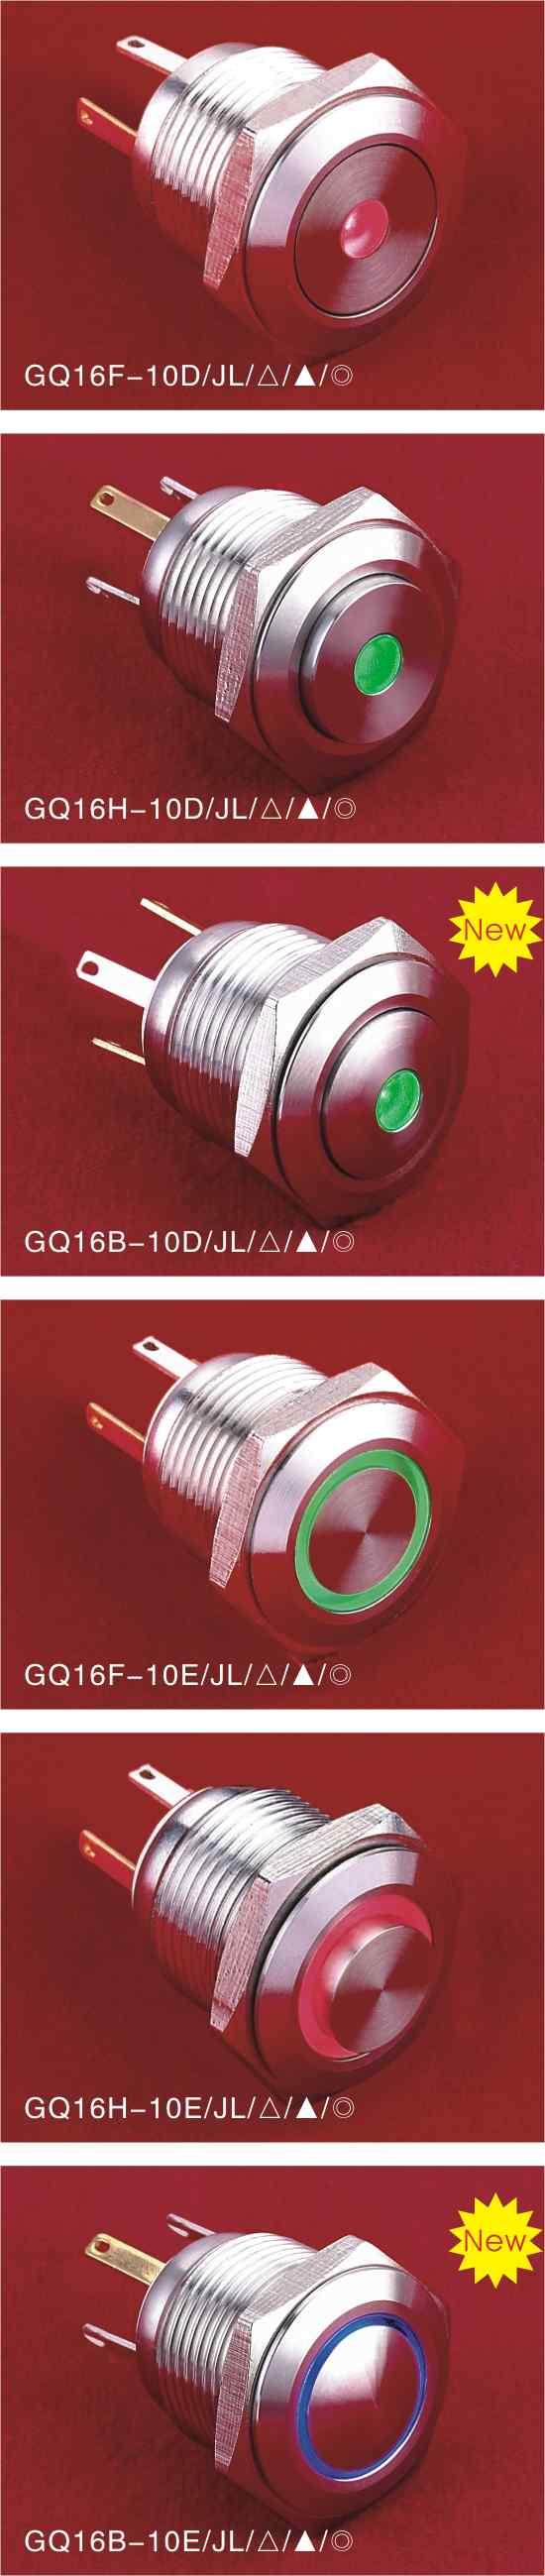 For signal lamp,part number is:gq16f-d/jl/ / / 1.5 25.5 For signal lamp,part number is:gq16h-d/jl/ / / 25.5 For signal lamp,part number is:gq16b-d/jl/ / / 25.